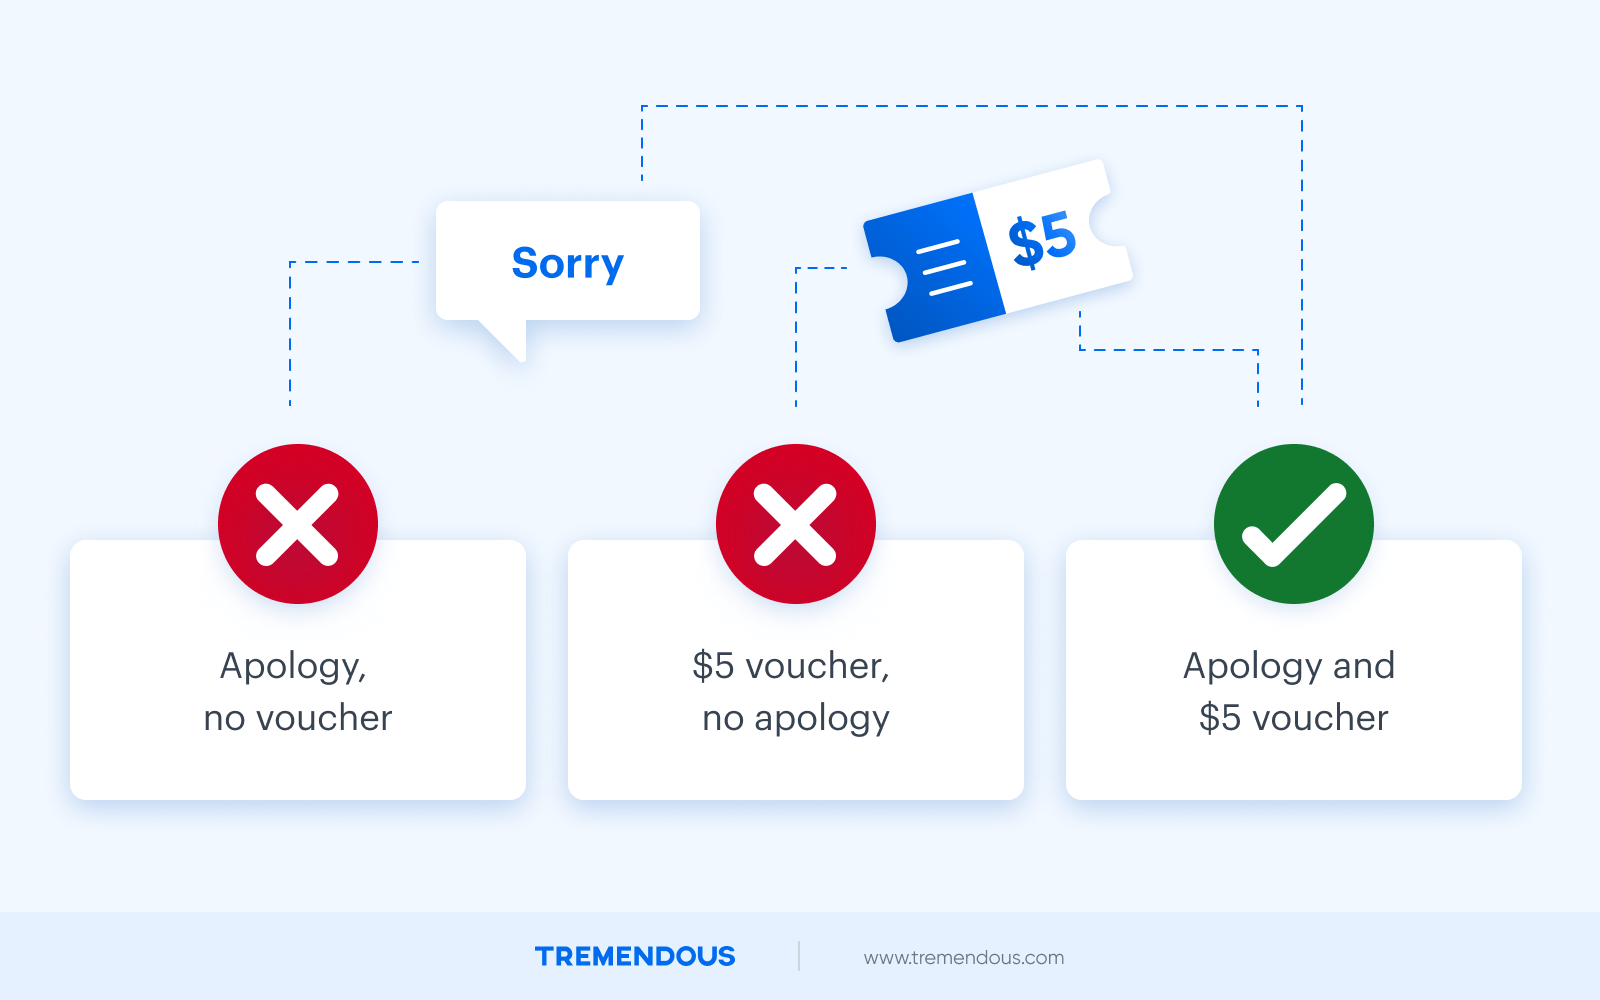 An image showing an apology with a small monetary incentive is an effective customer appeasement.